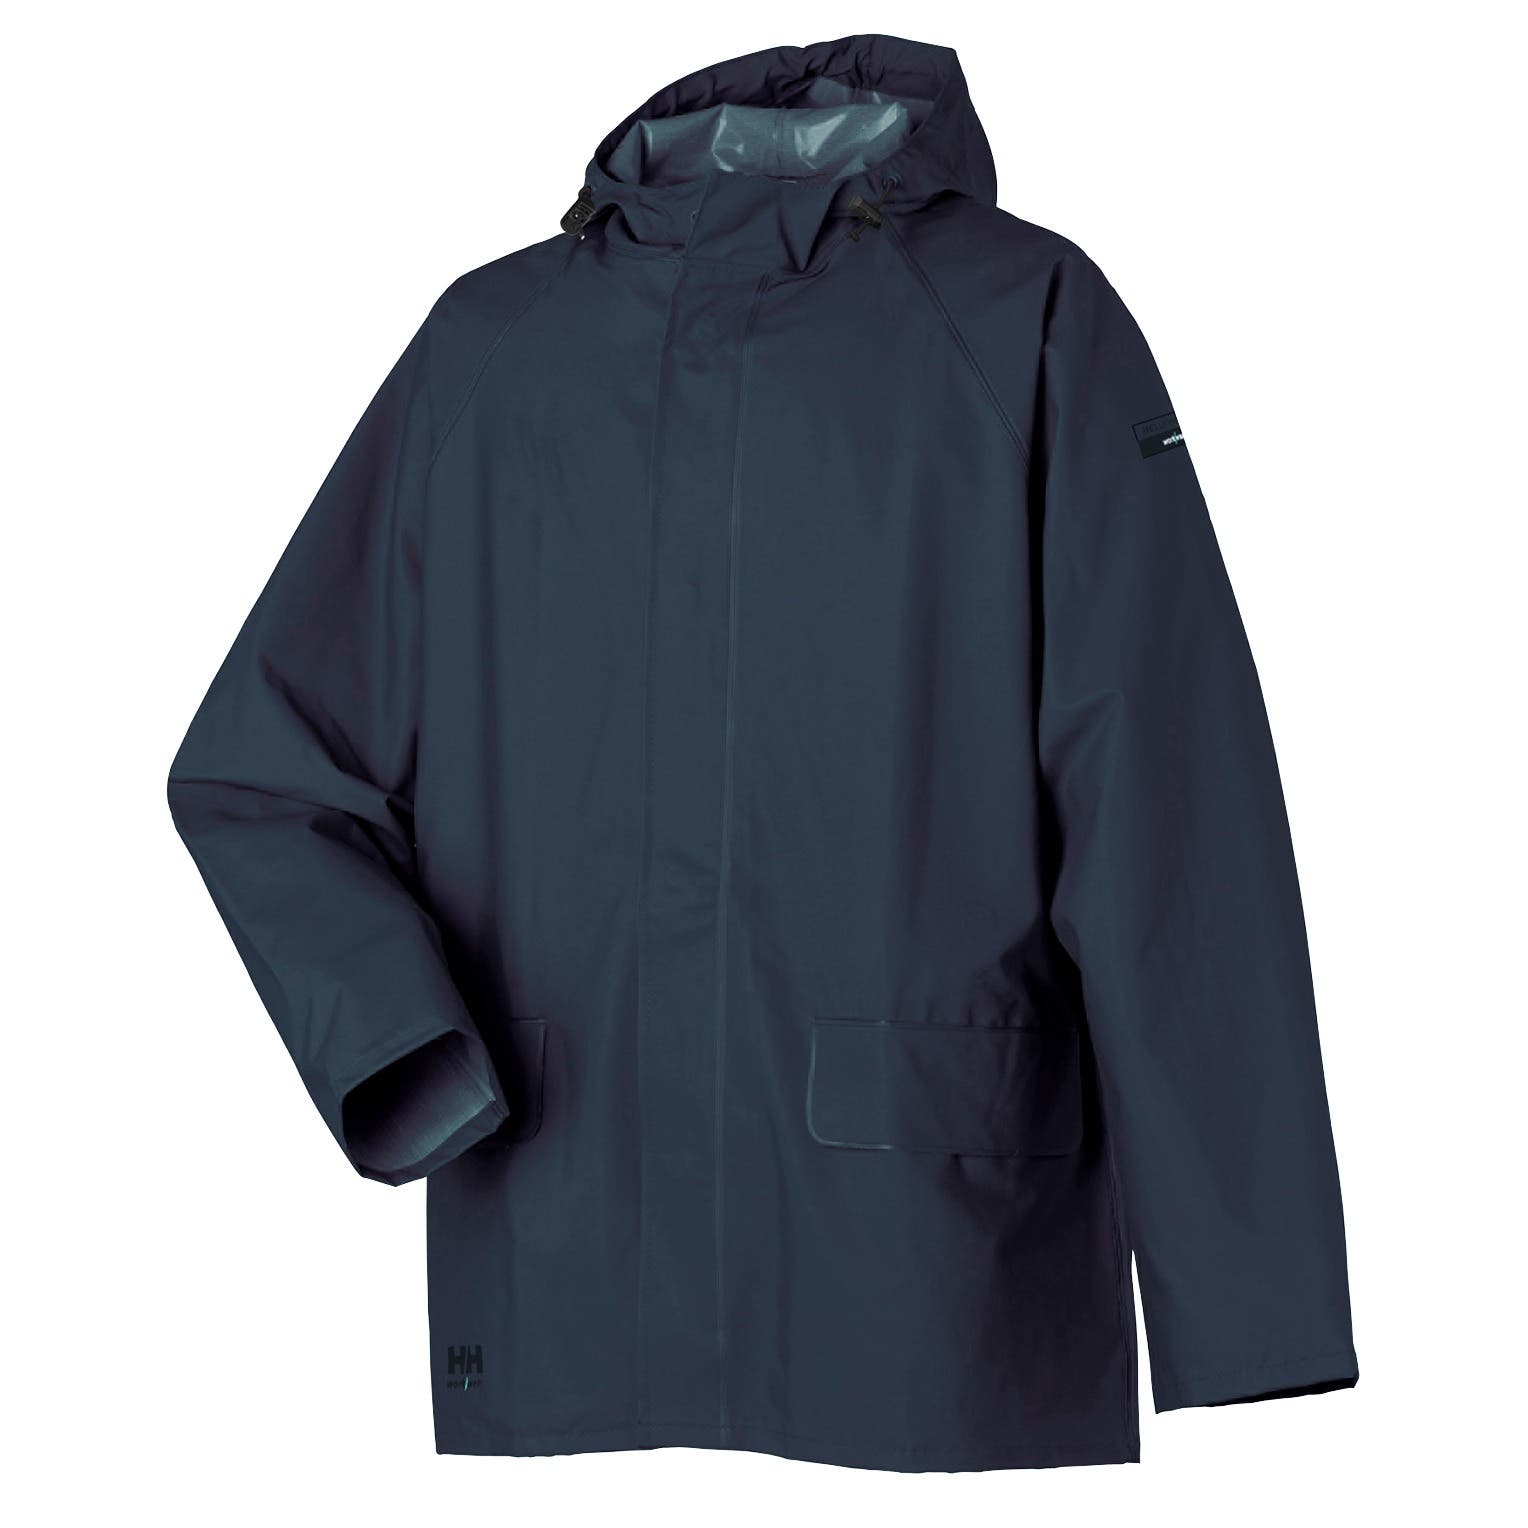 Helly Hansen Men's Mandal Rain Jacket in Classic Navy from the front